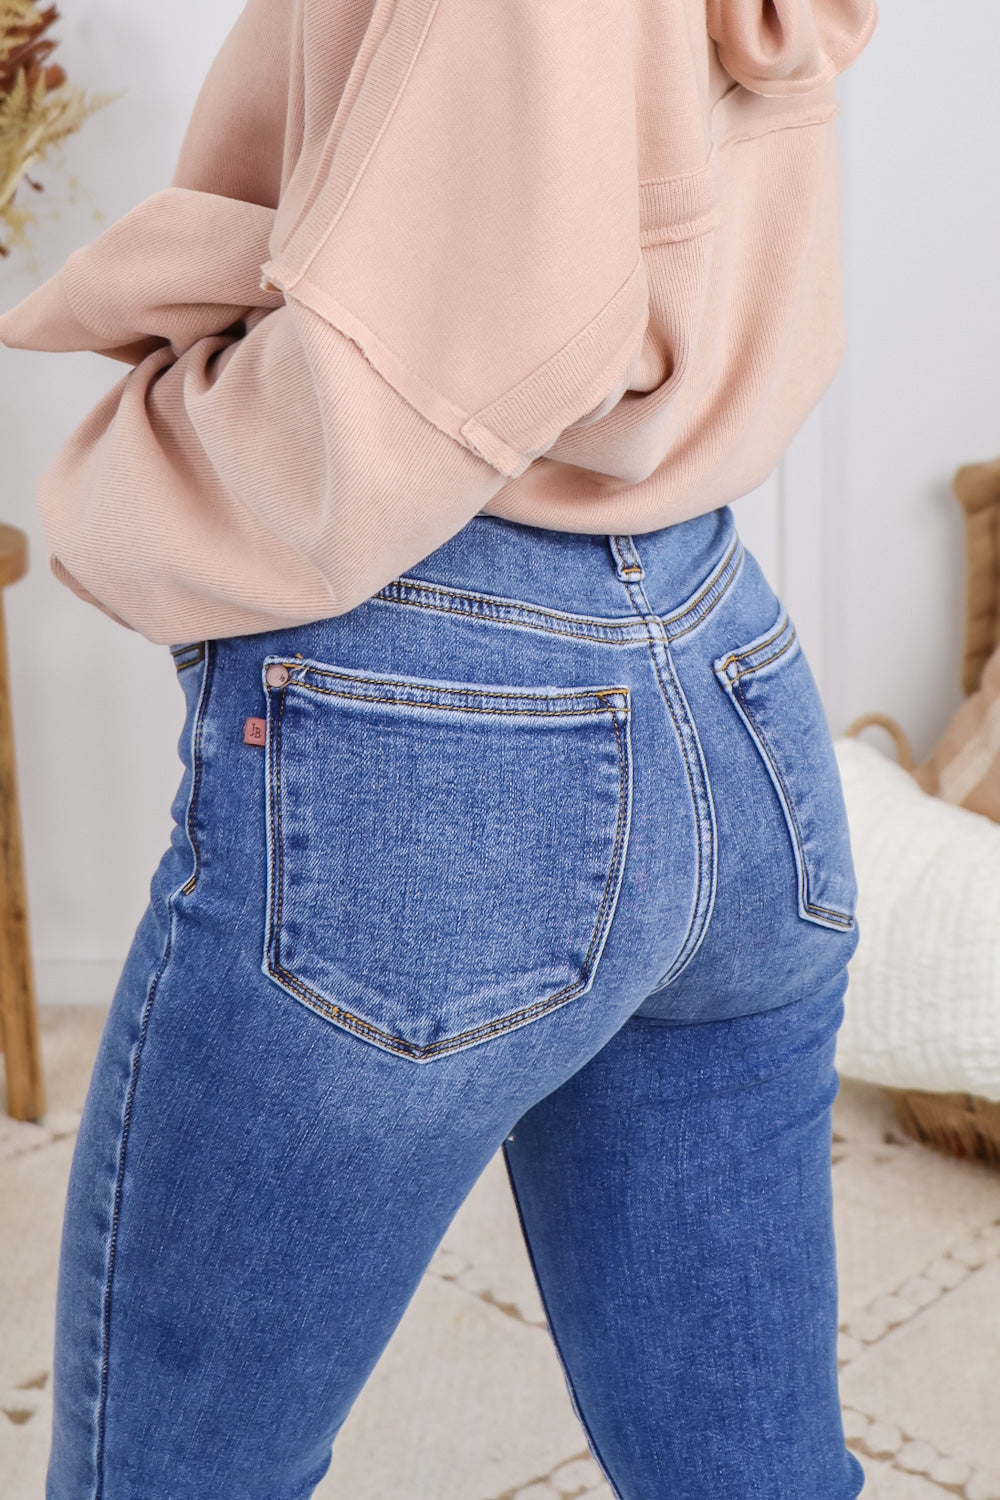 Classic Skinny Jeans Low Waist pants for her soft fabric 801